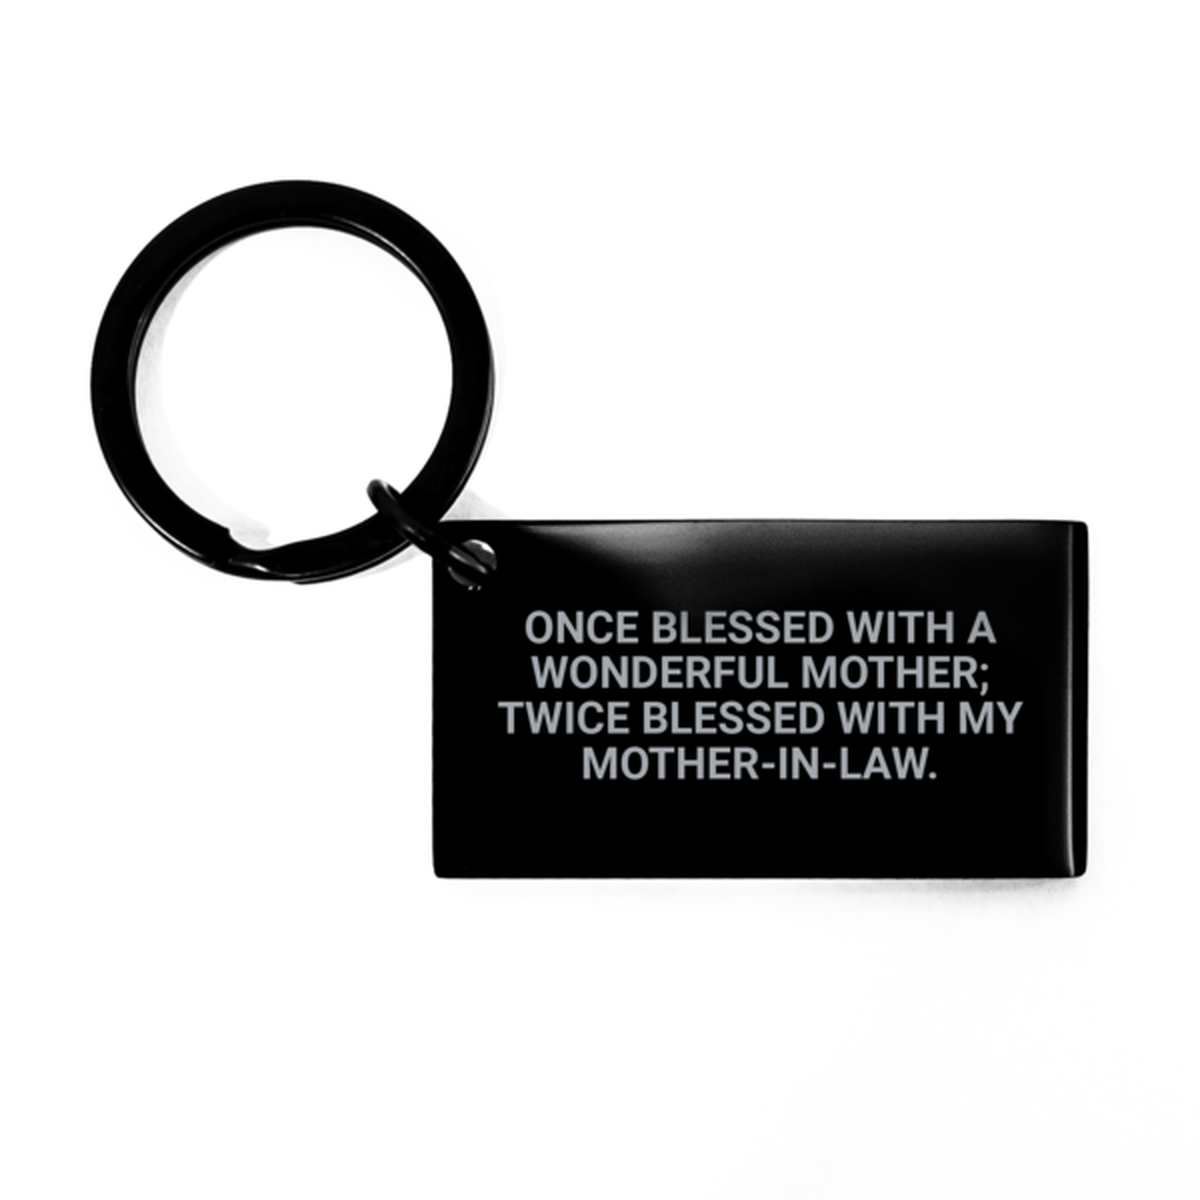 To My Mother-In-Law Black Keychain, Wonderful Mother, Valentines Gifts For Mother-In-Law From Daughter-In-Law, Birthday Gifts For Women